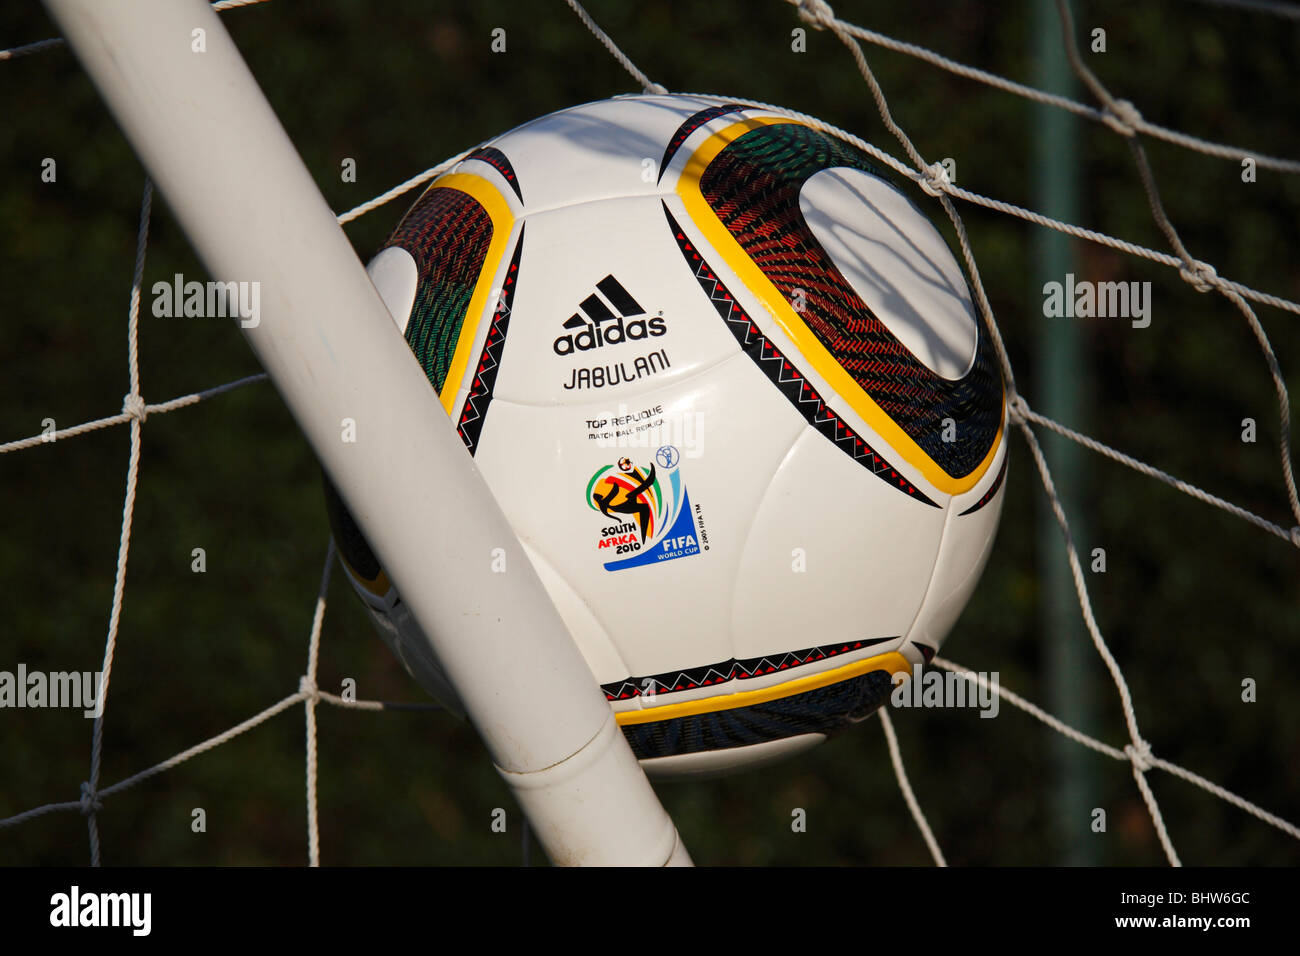 The FIFA 2010 World Cup replica match ball by Adidas, the Jabulani, in the  corner of a football net Stock Photo - Alamy